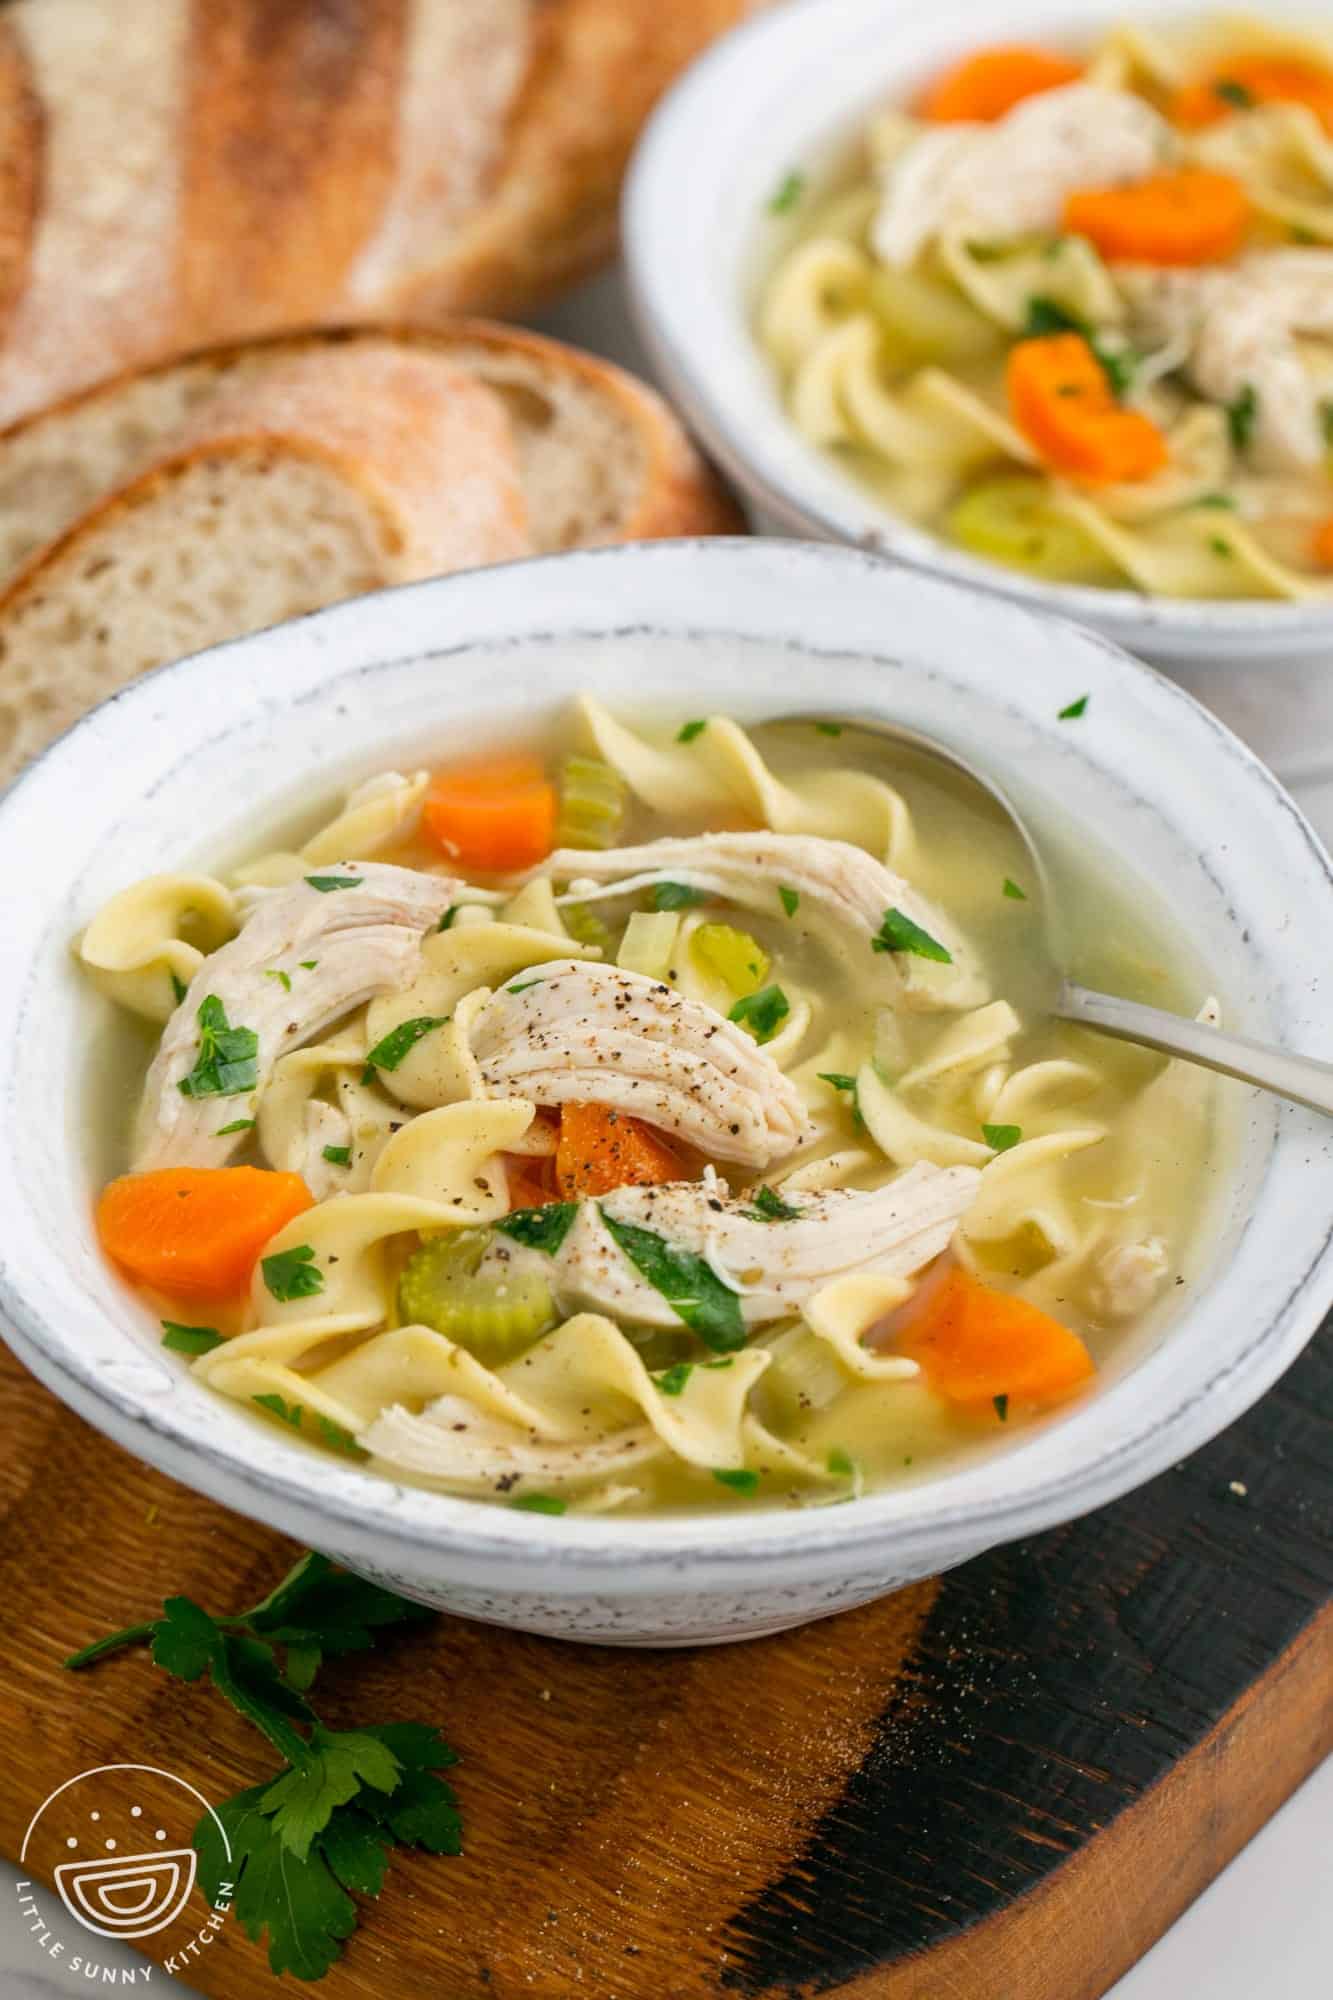 a bowl of chicken noodle soup with large pieces of shredded chicken, carrots, celery, and egg noodles. there's a spoon in the bowl and a loaf of bread in the background